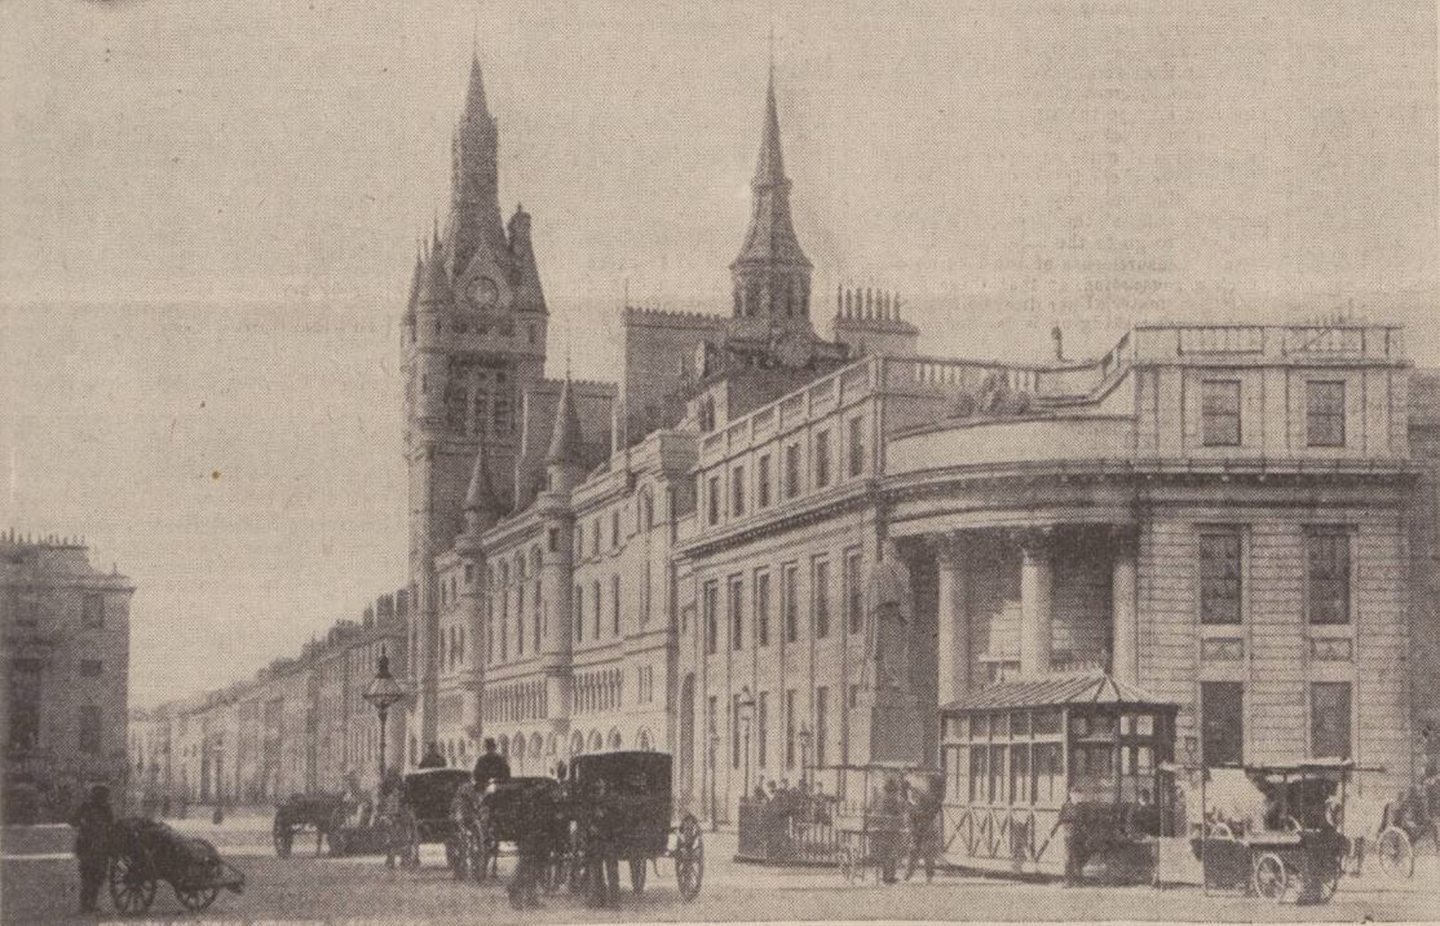 Aberdeen's Castlegate in 1884 with the cabmen's shelter standing in front of the bank on the corner of King Street and Castle Street. 